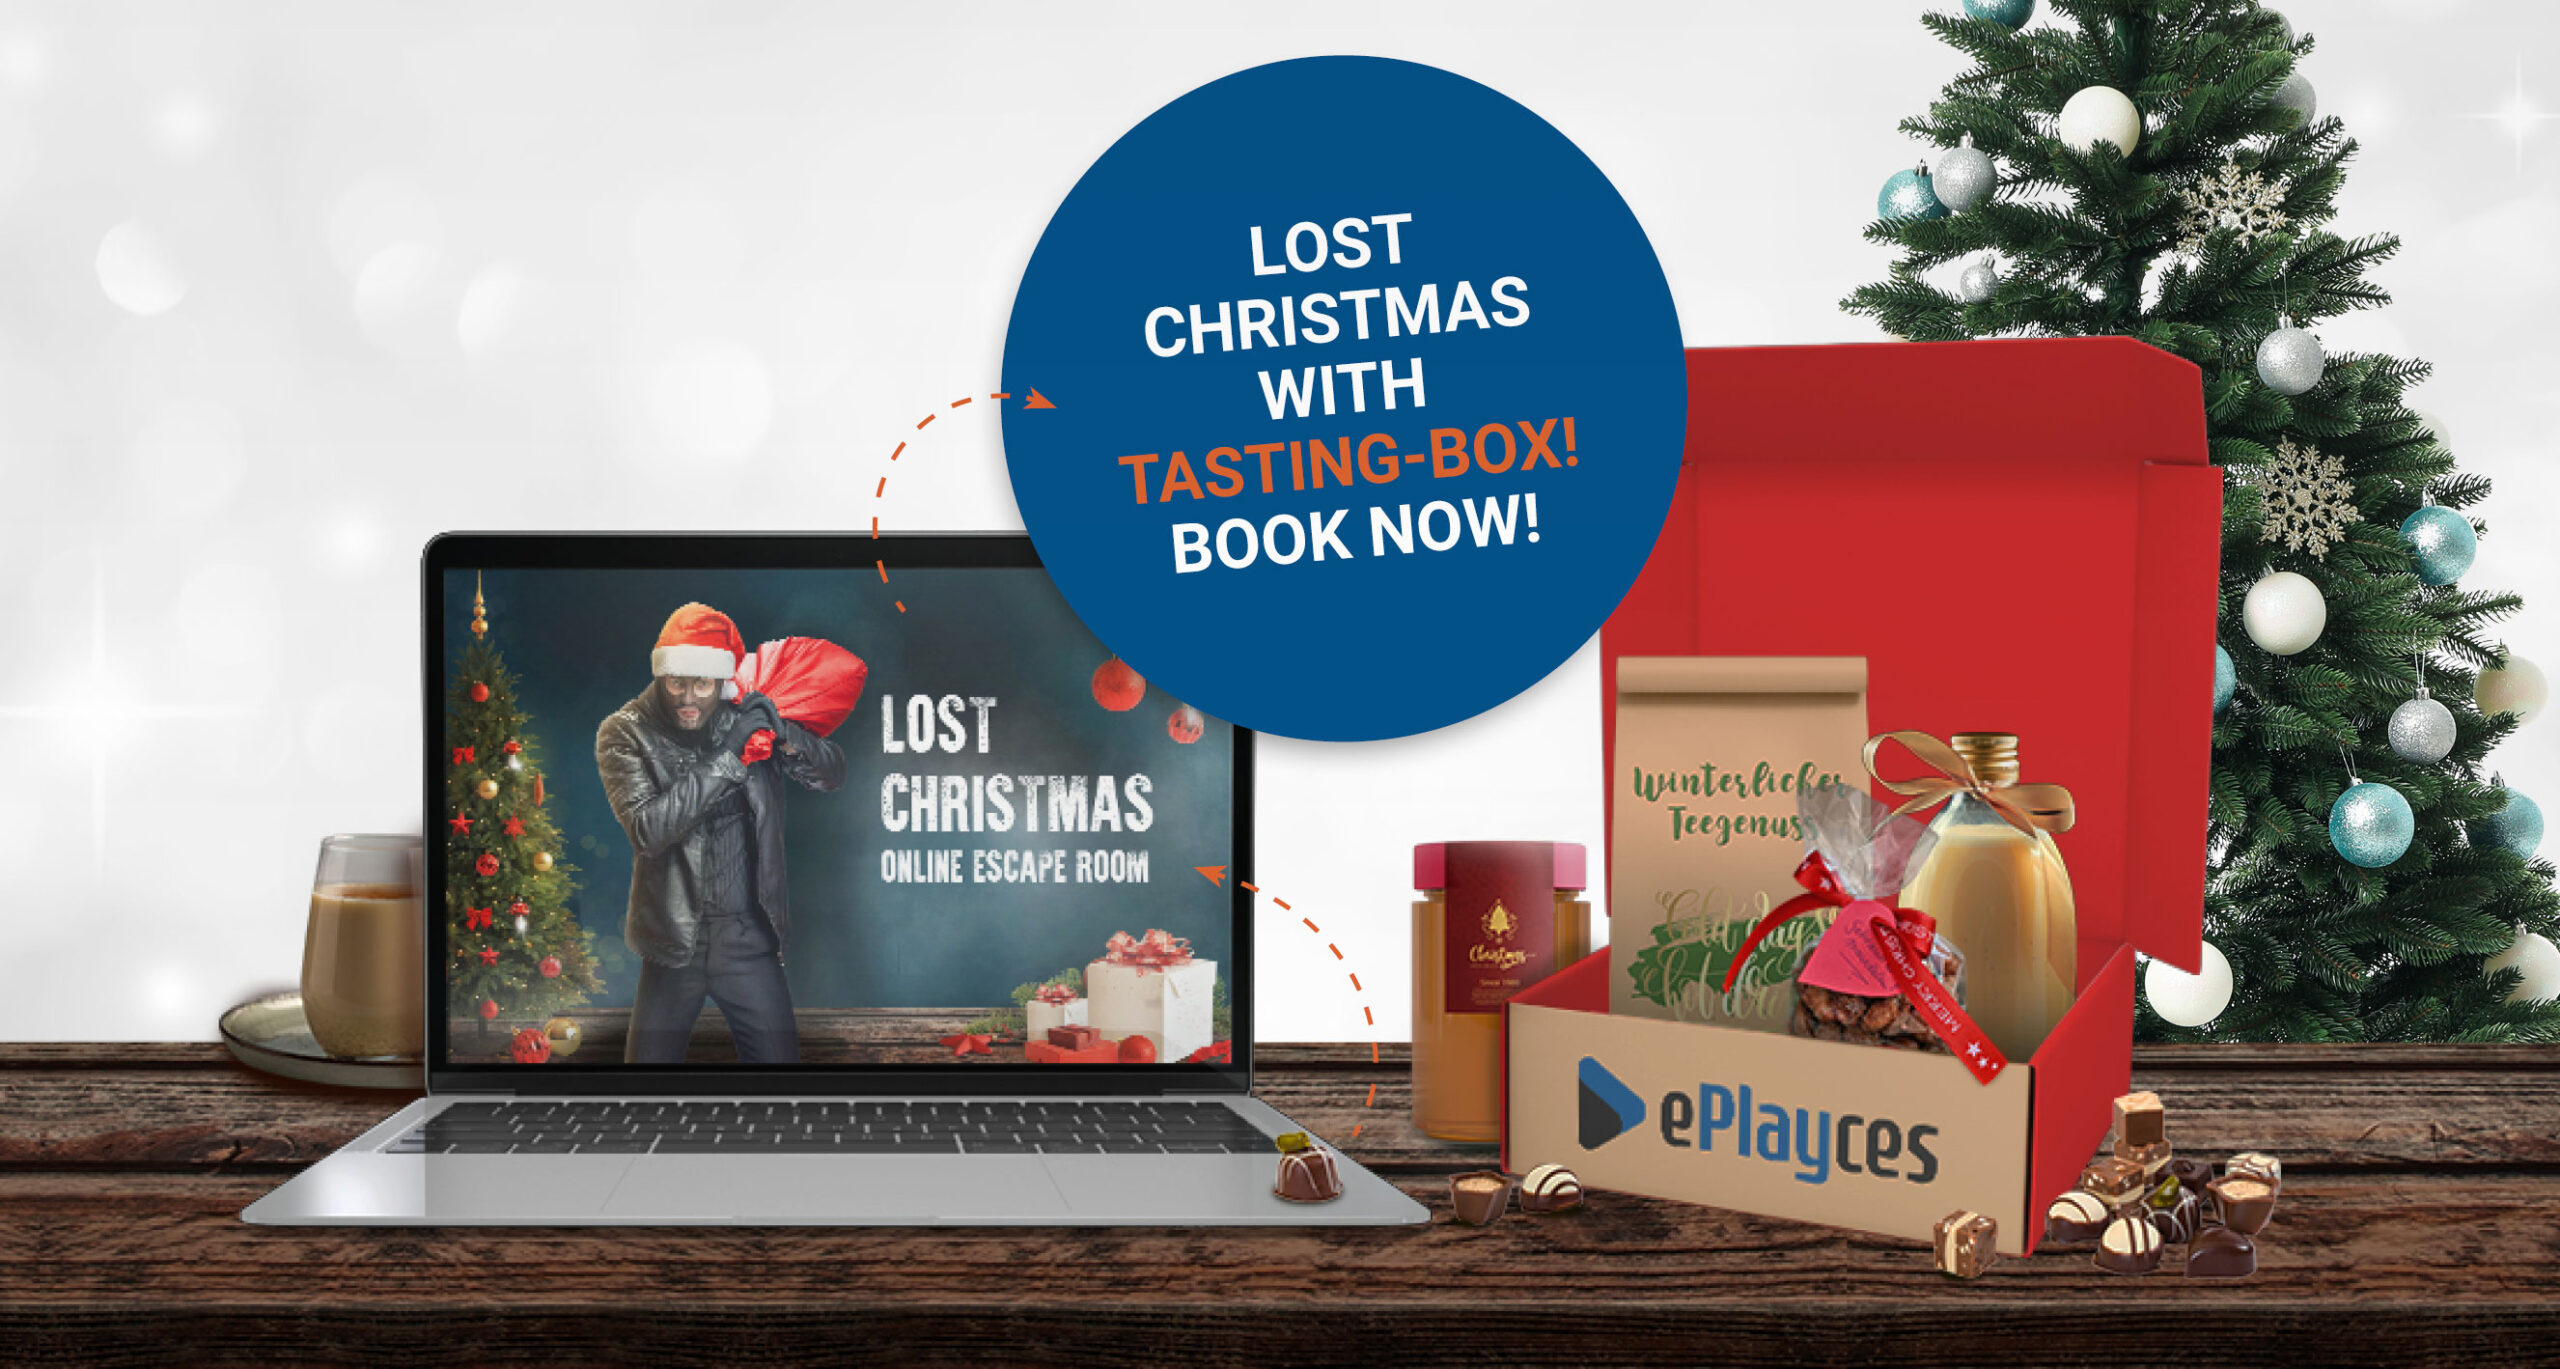 Online Escape Room Lost Christmas with Tasting-Box